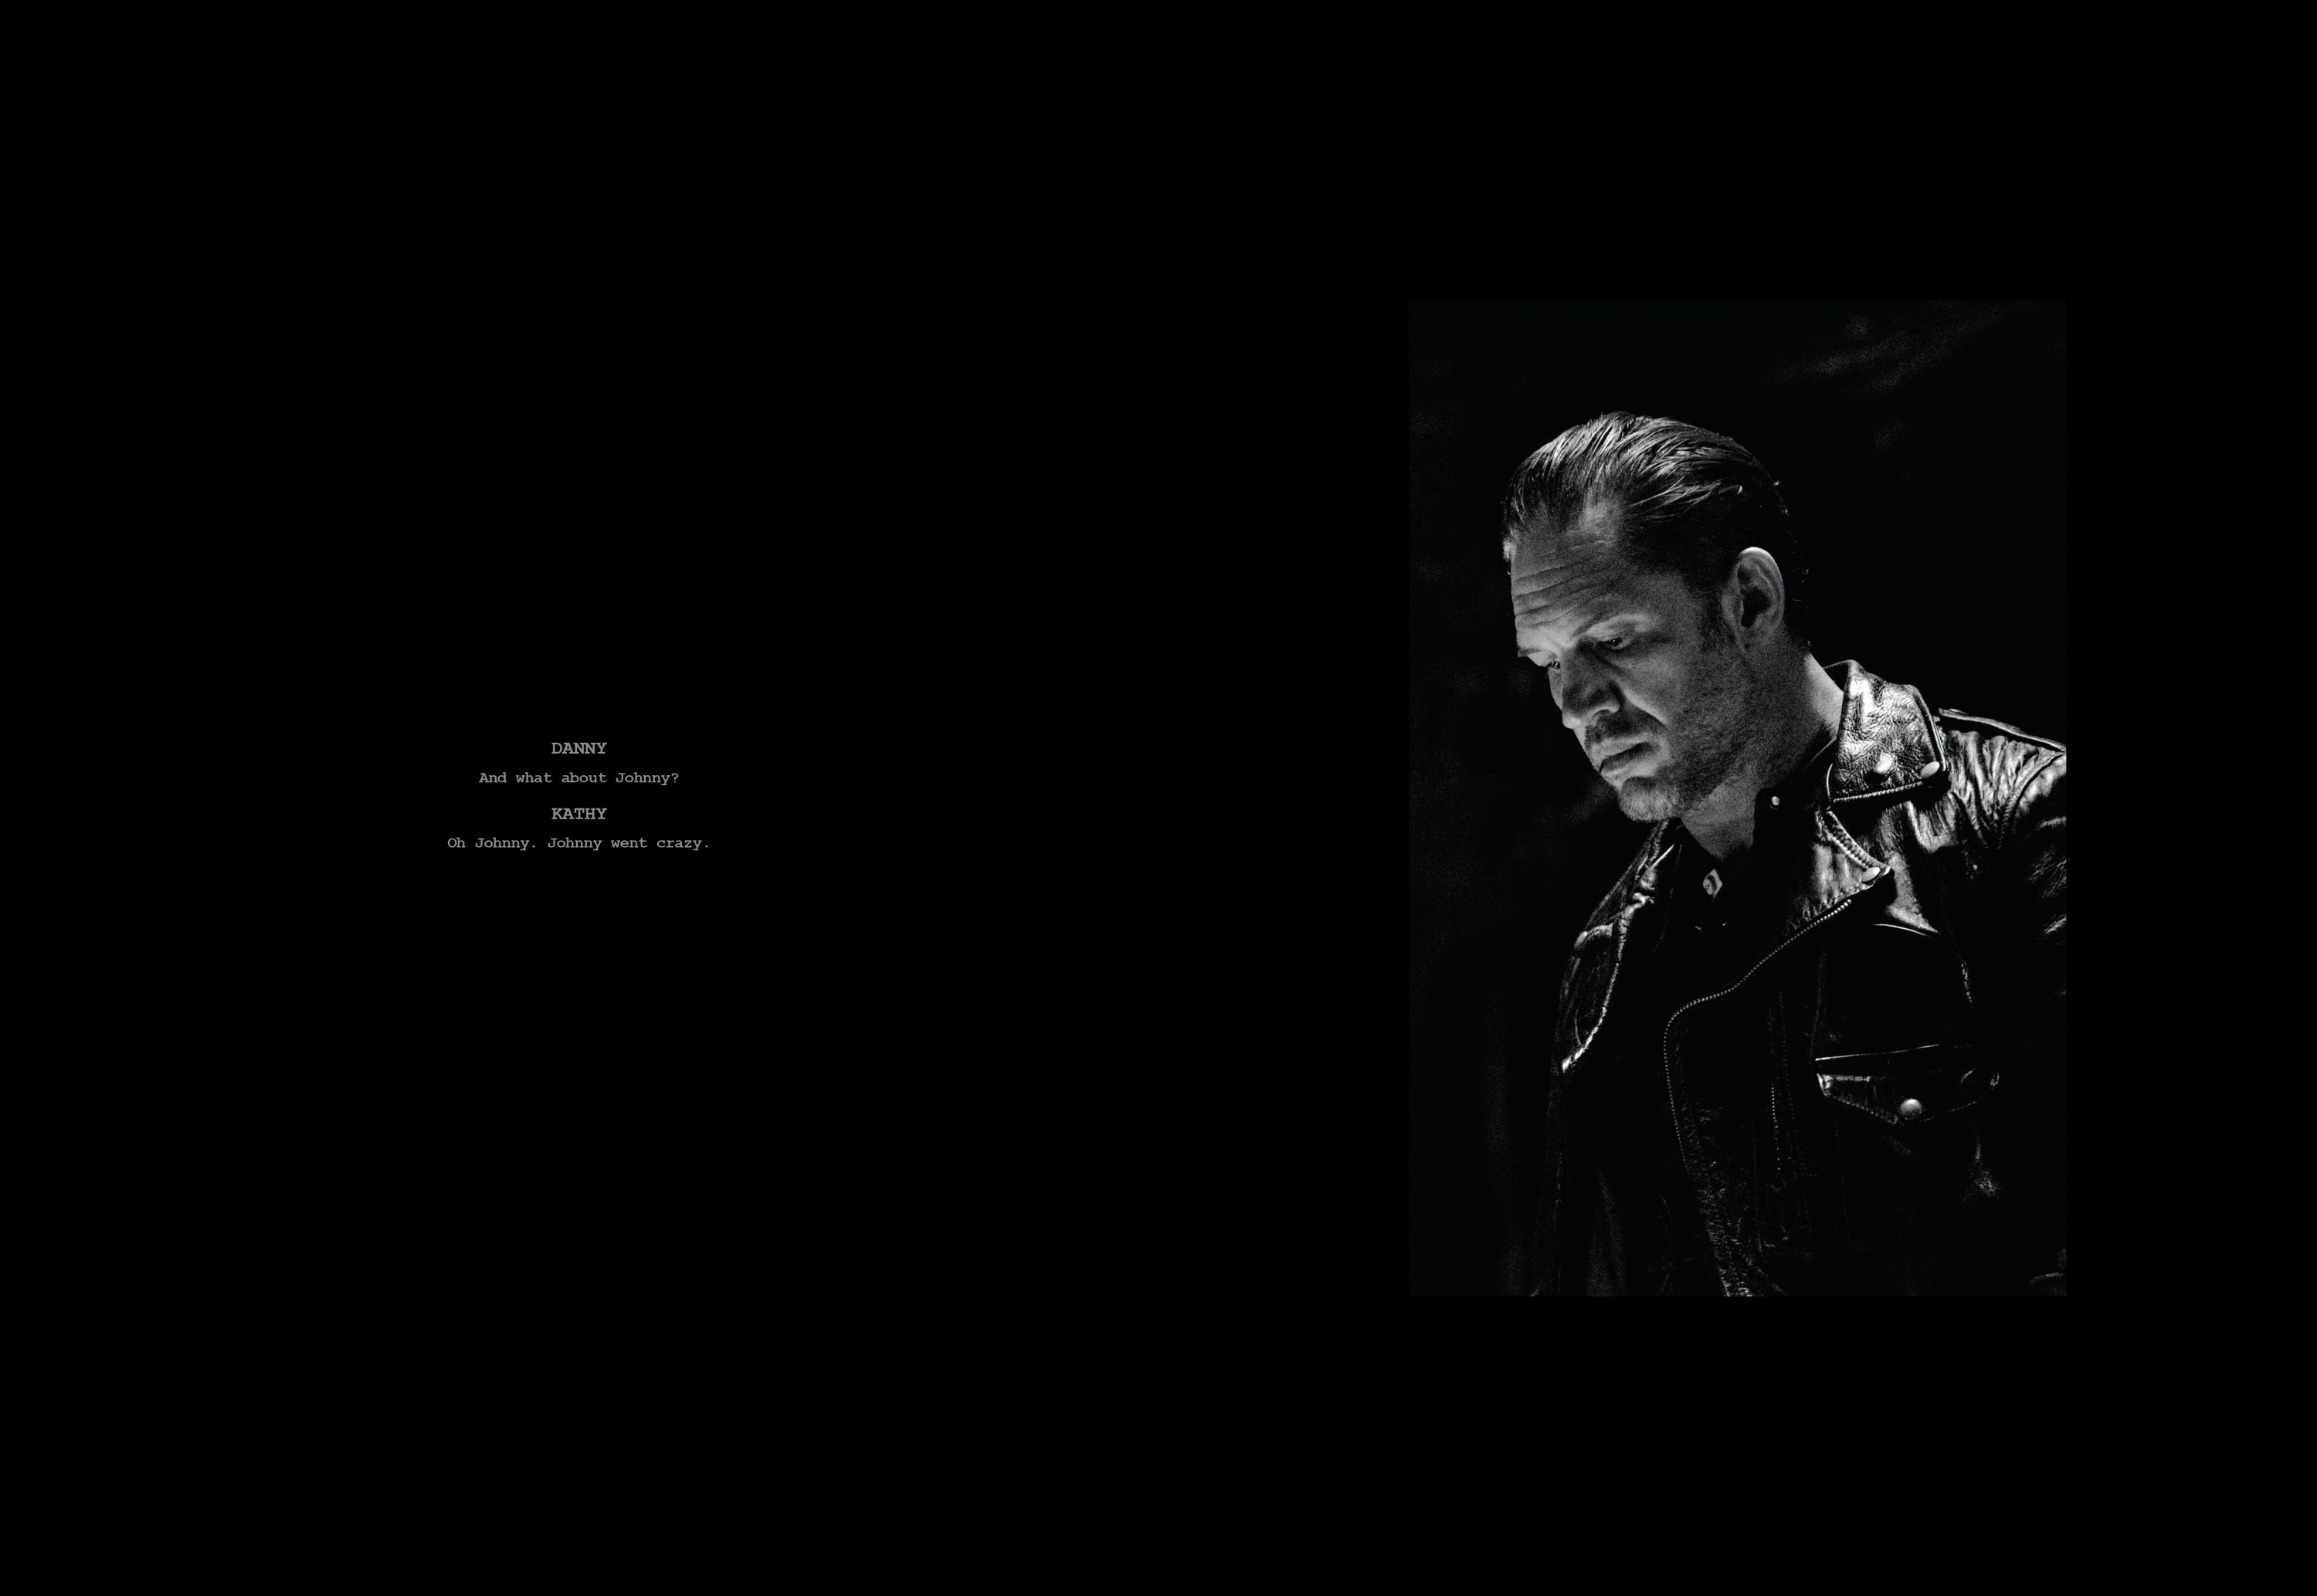 Tom Hardy in the new book 'Vandals: The Photography of The Bikerides' published by Insight Editions.